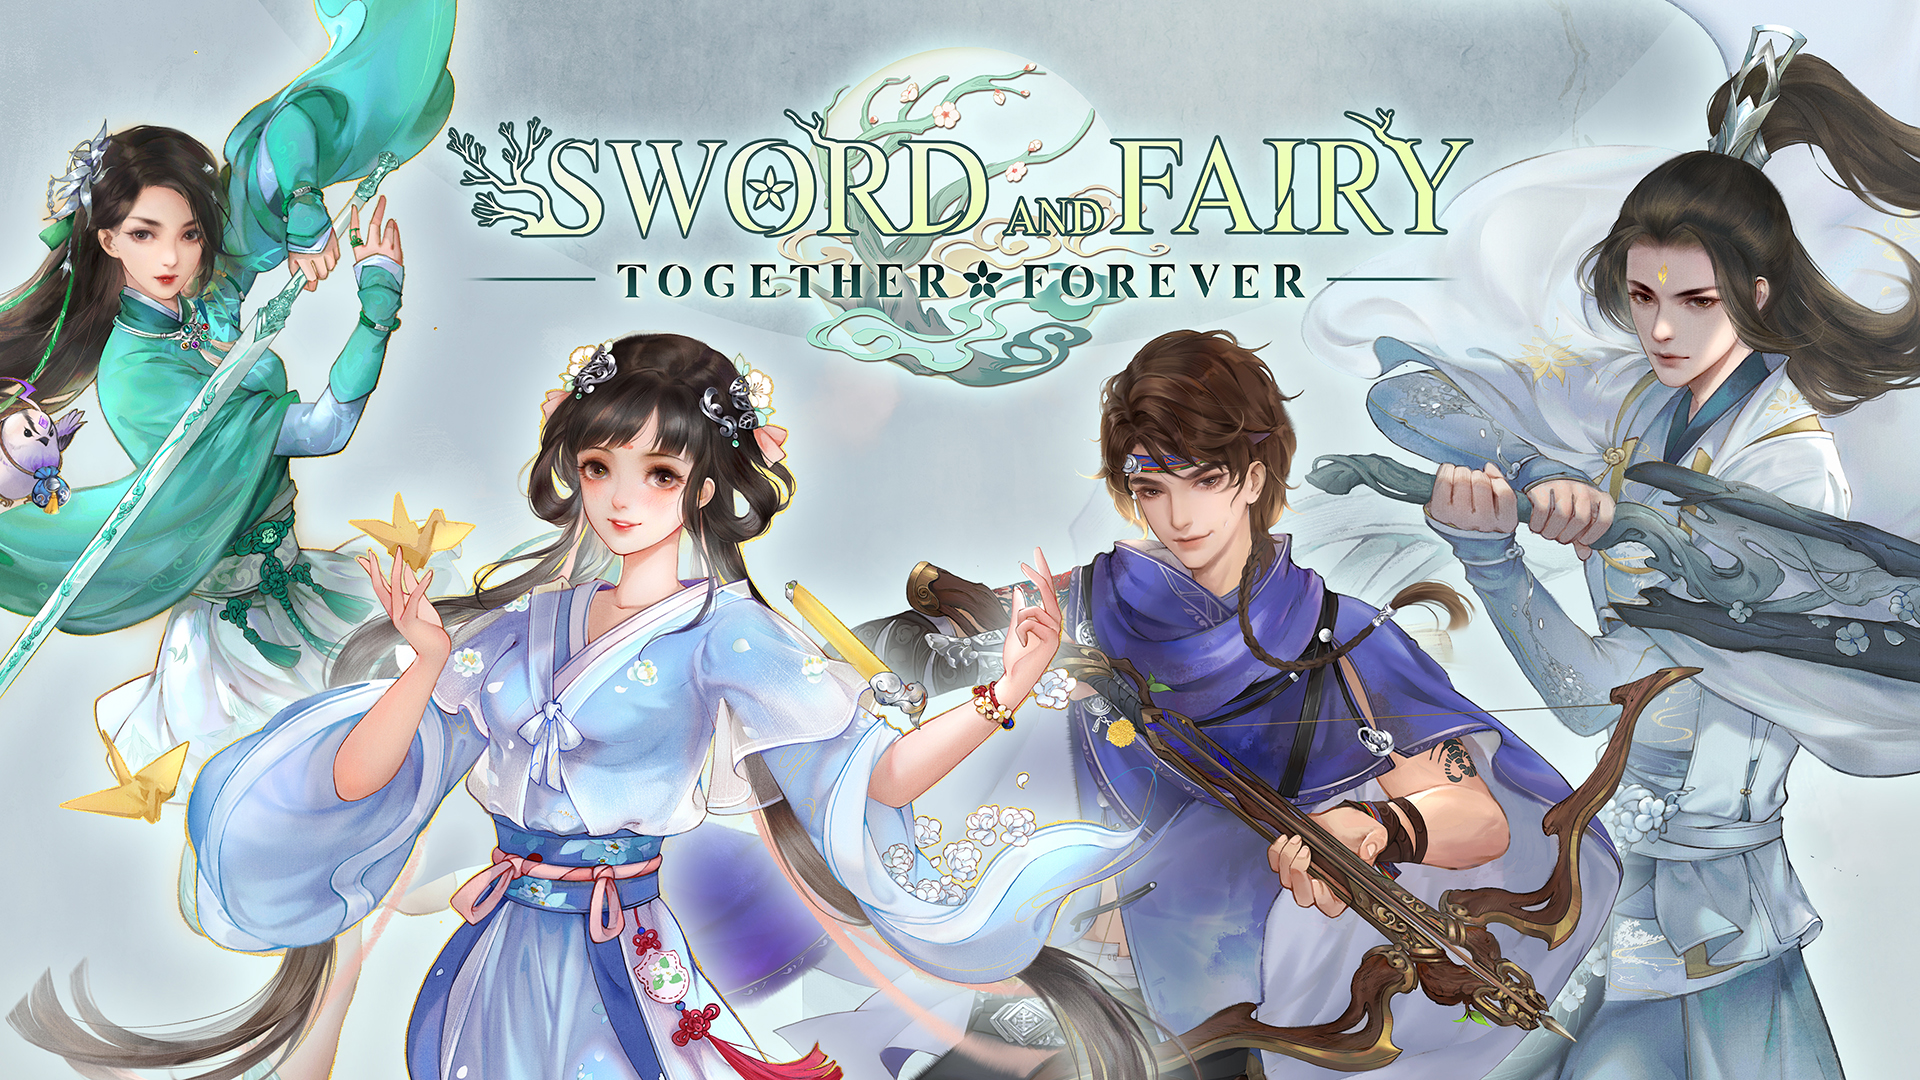 Promotional Artwork for Sword and Fairy: Together Forever. It includes the logo at the top centre, surround by four characters. Two have sword, one has a bow, and one appears to be doing magic.